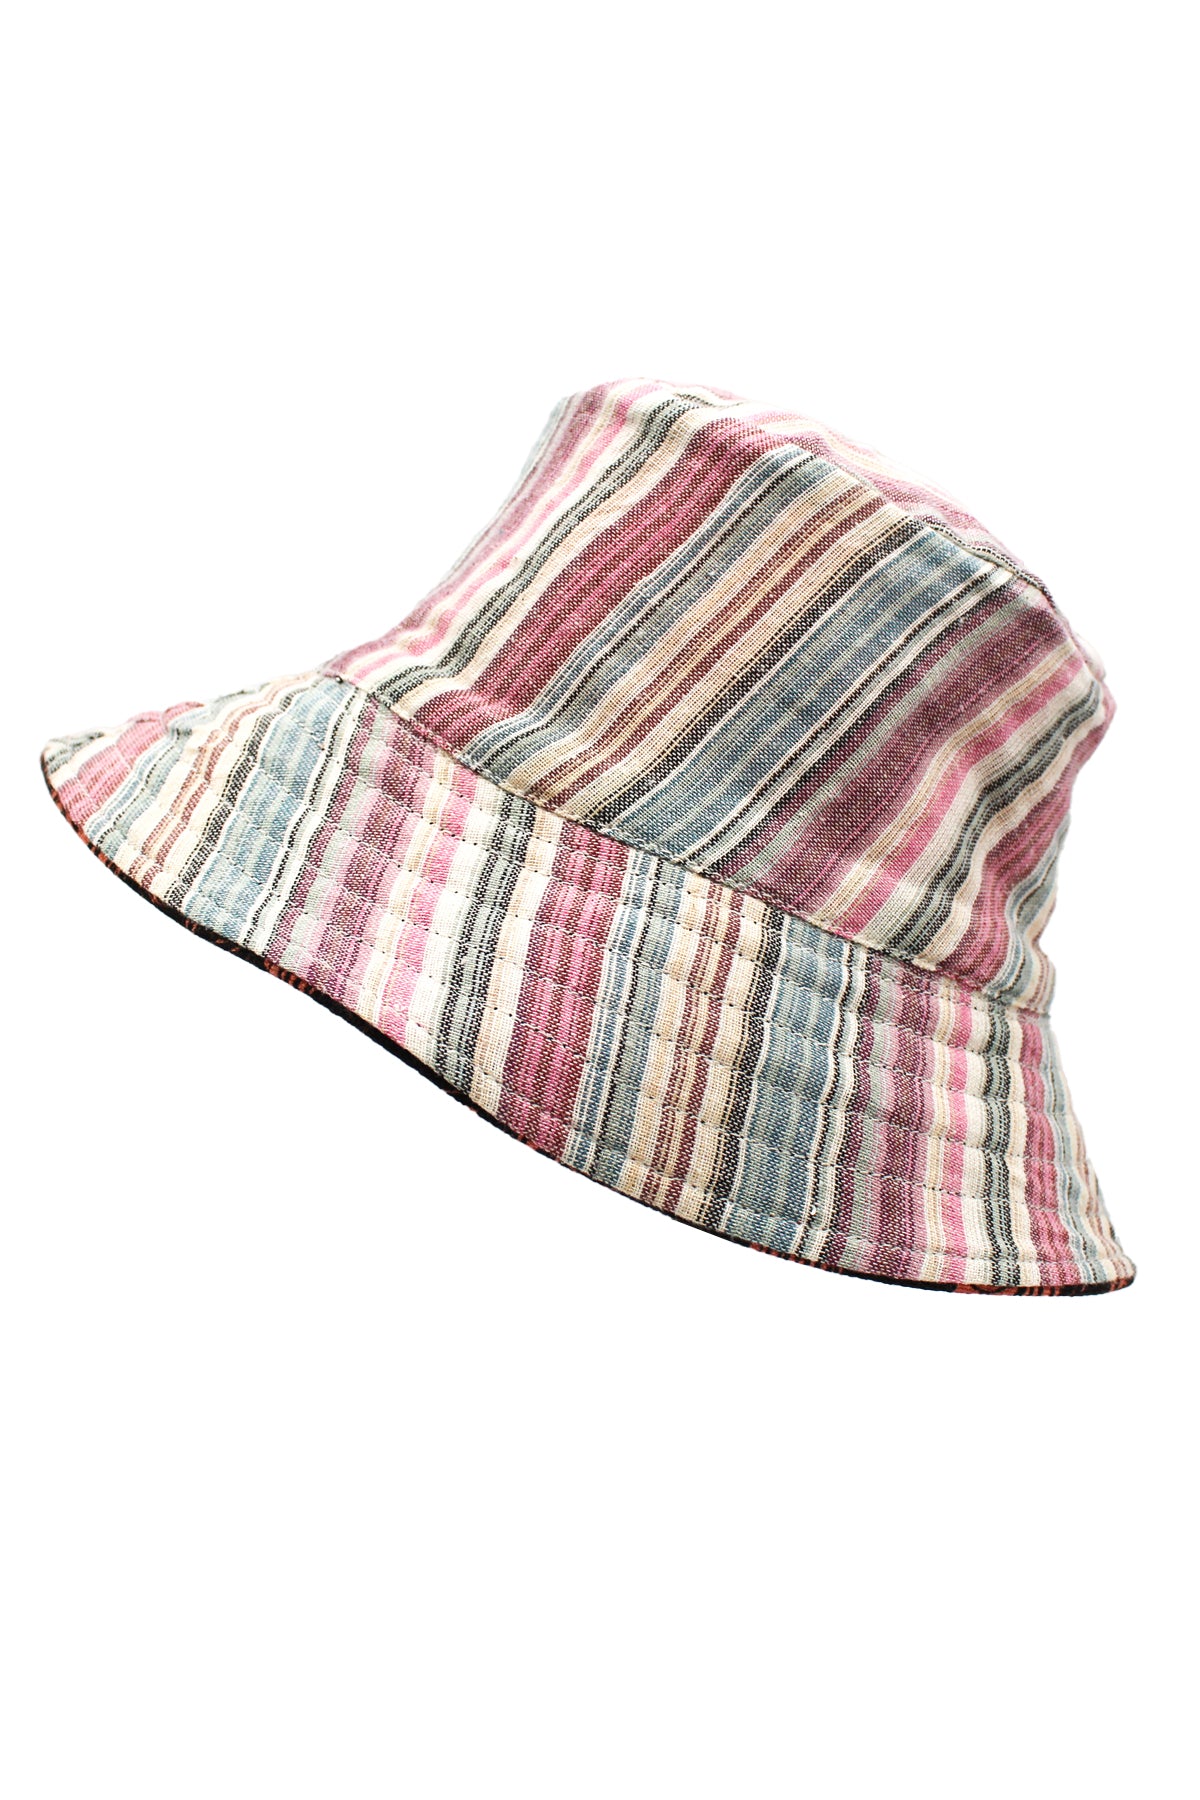 Surf The Wave Bucket Hat